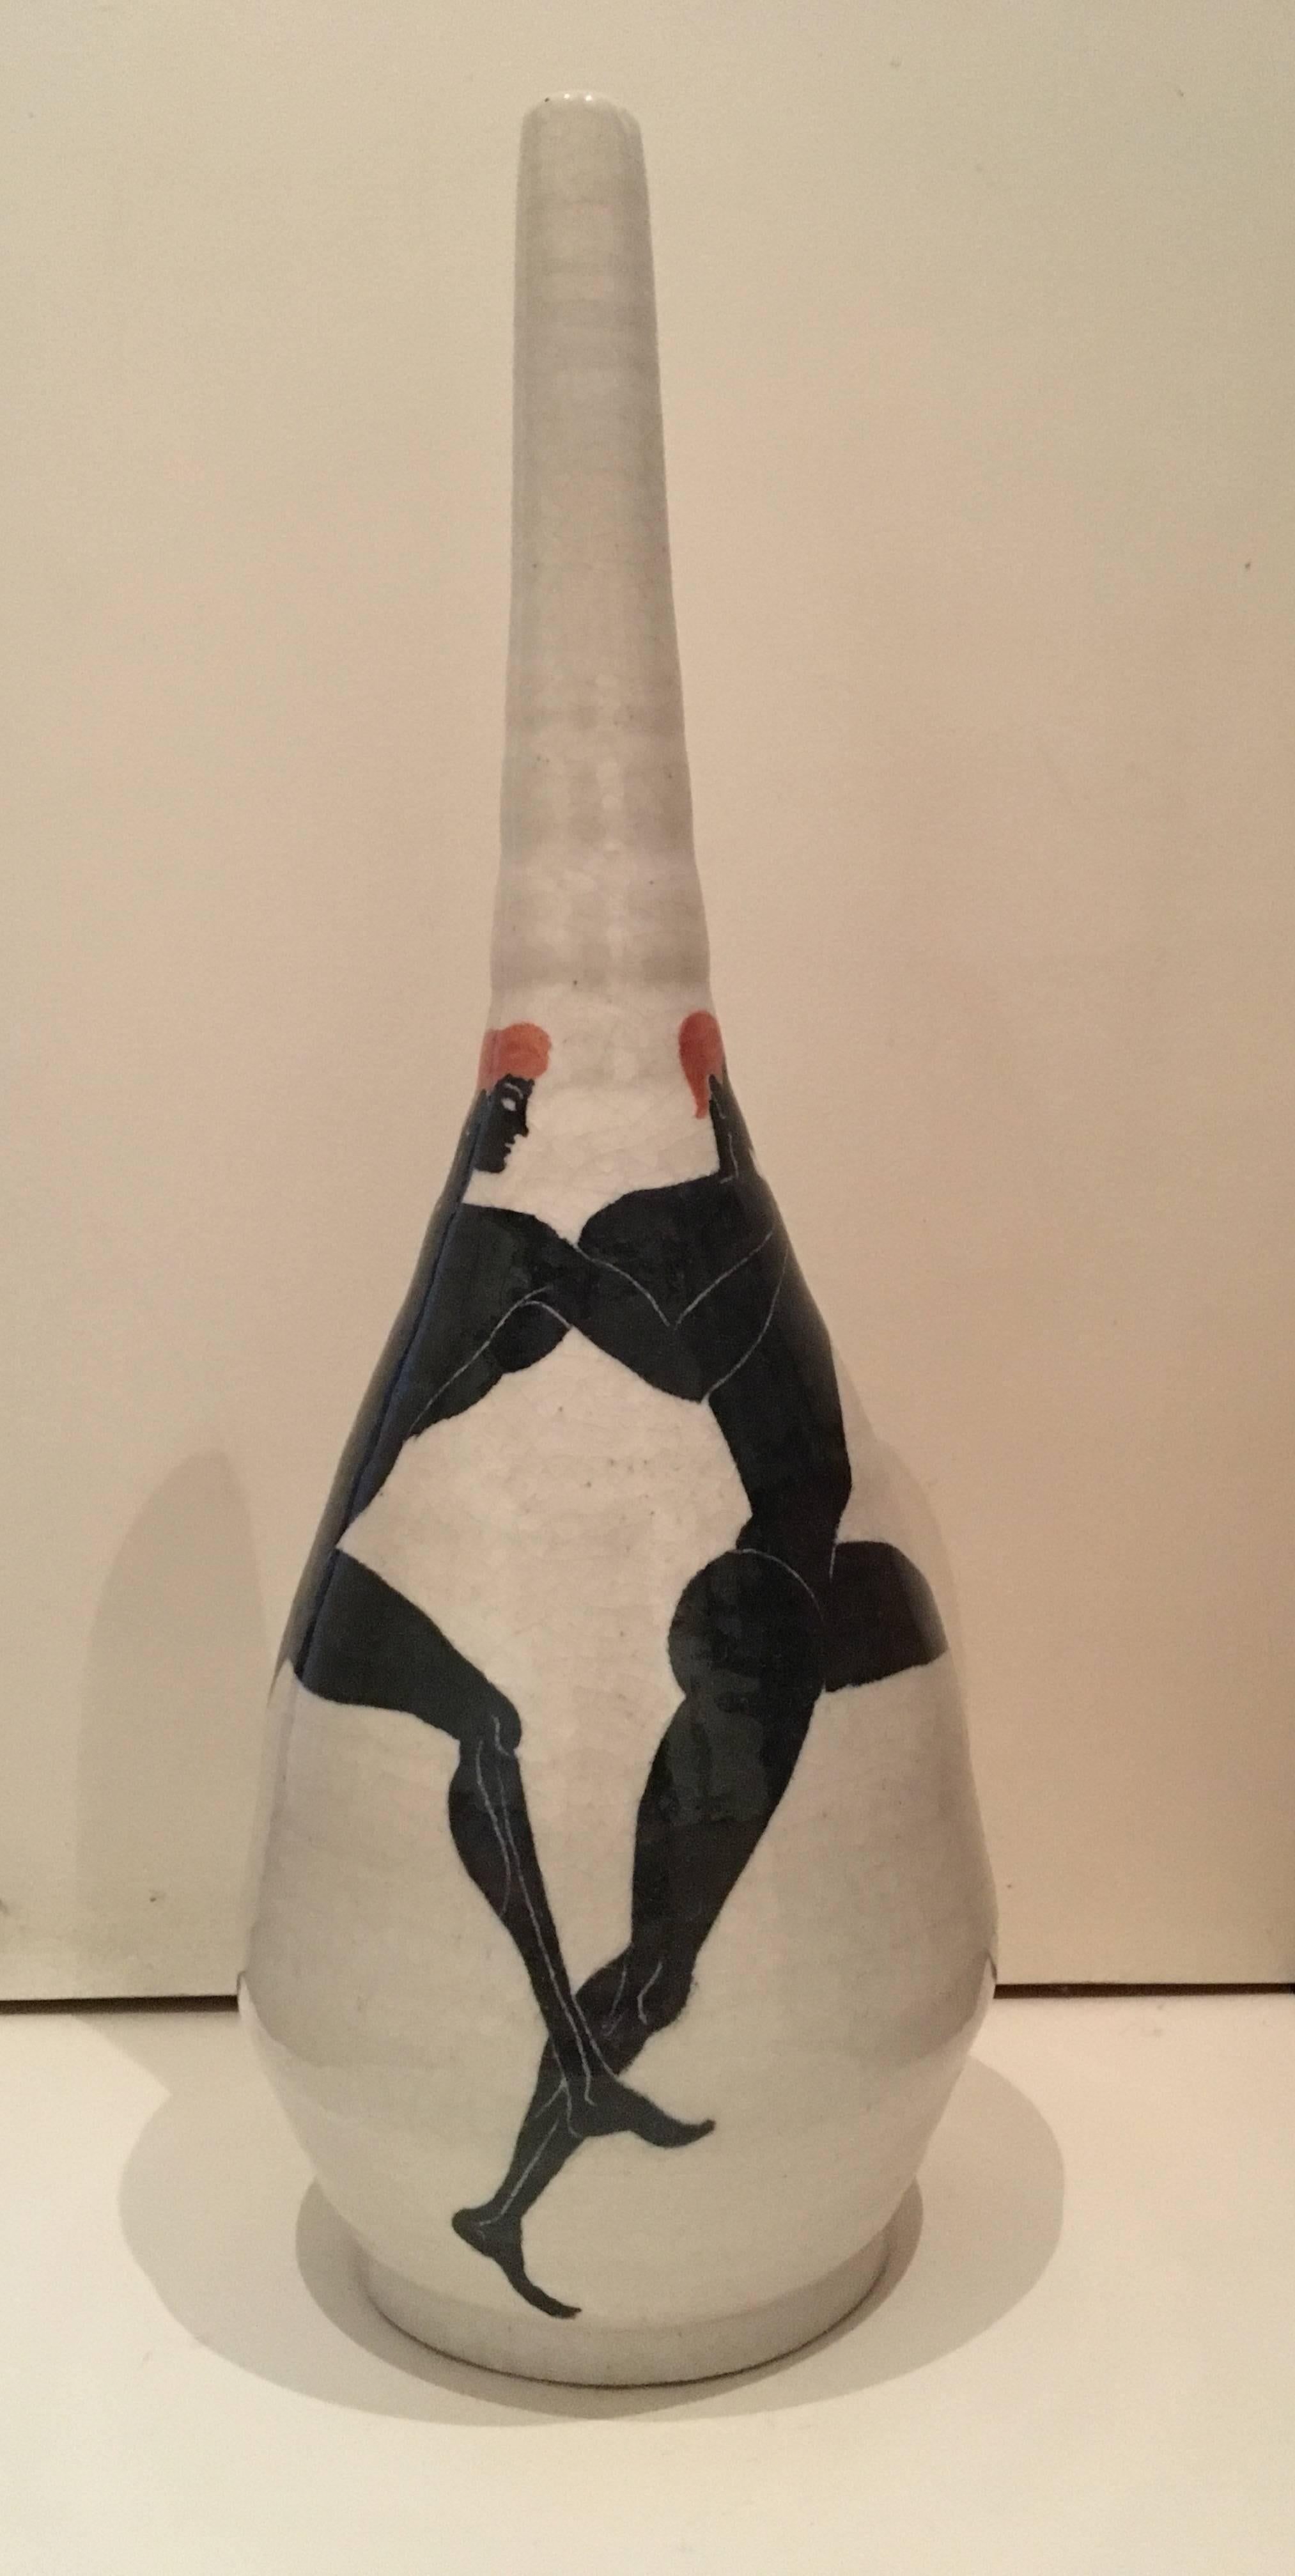 A rare vase by artist Ernestine Cannon (1904-1969,) 
representing Grecian Athletes.
Signed and dated Ernestine 20th of march 1953. Vietri .
Ernestine Cannon (1904-1969), also known as Ernestine Virden-Cannon, was an American ceramicist and designer